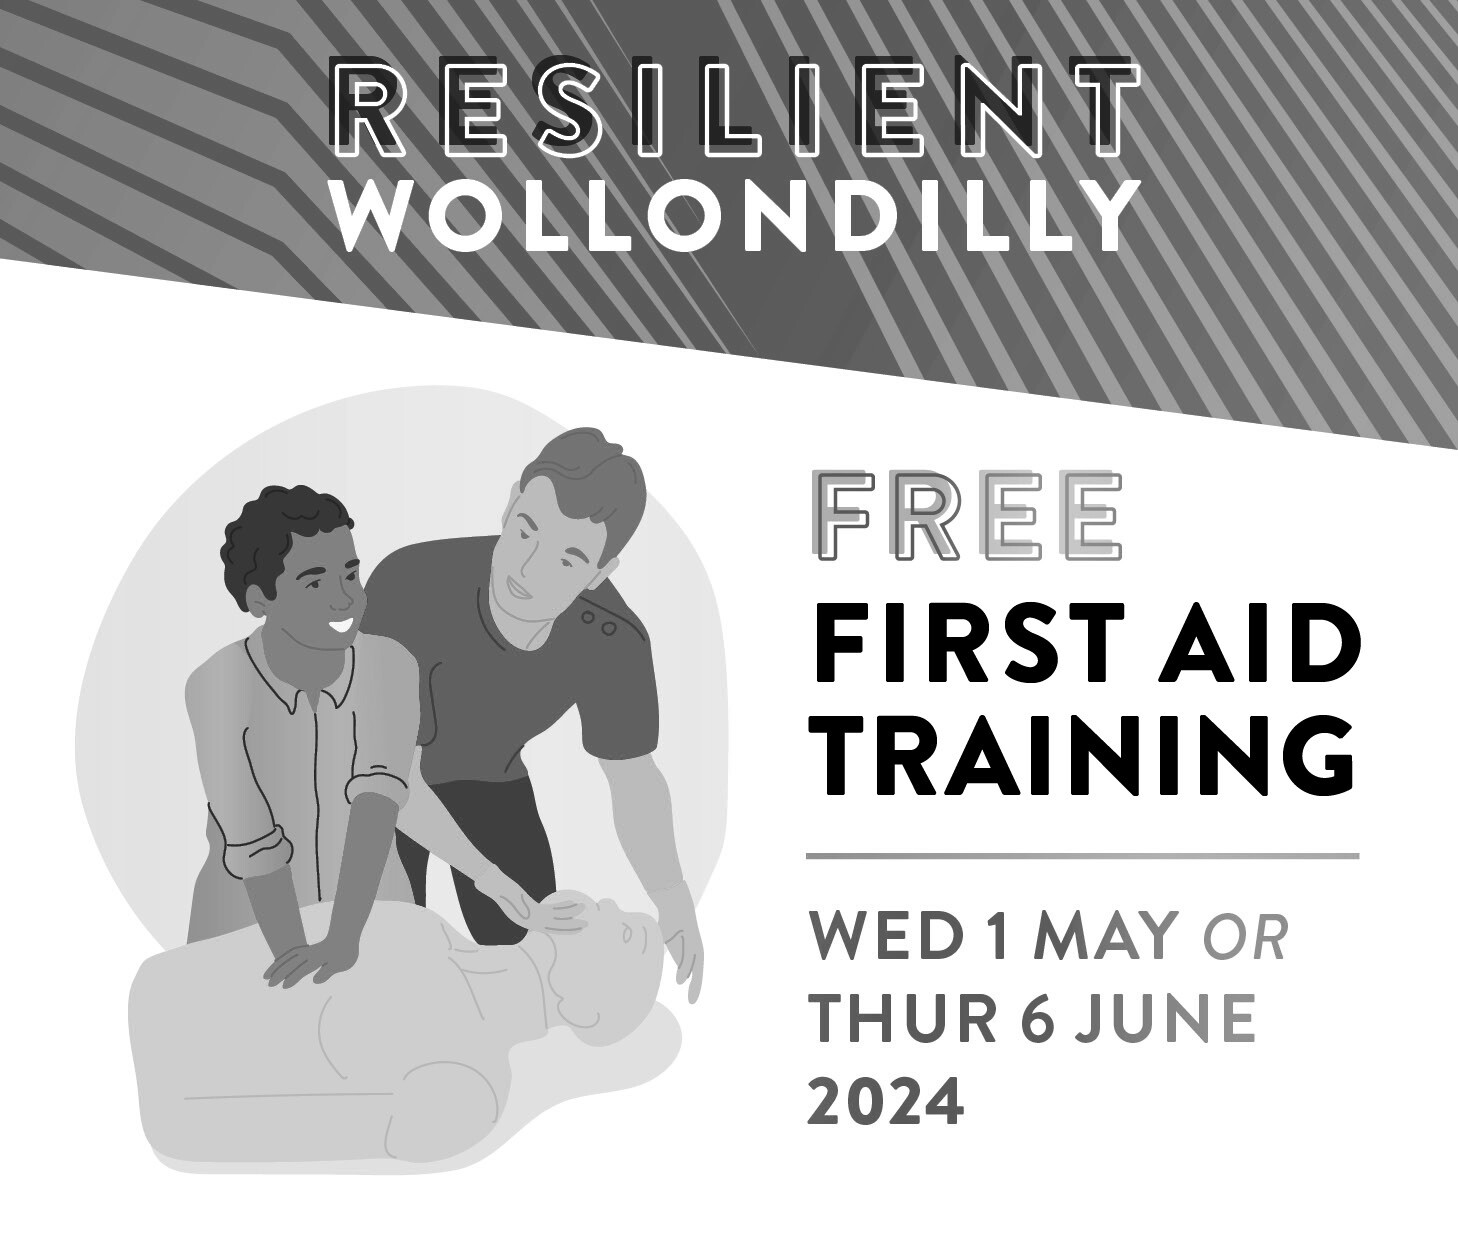 Free first aid training sessions